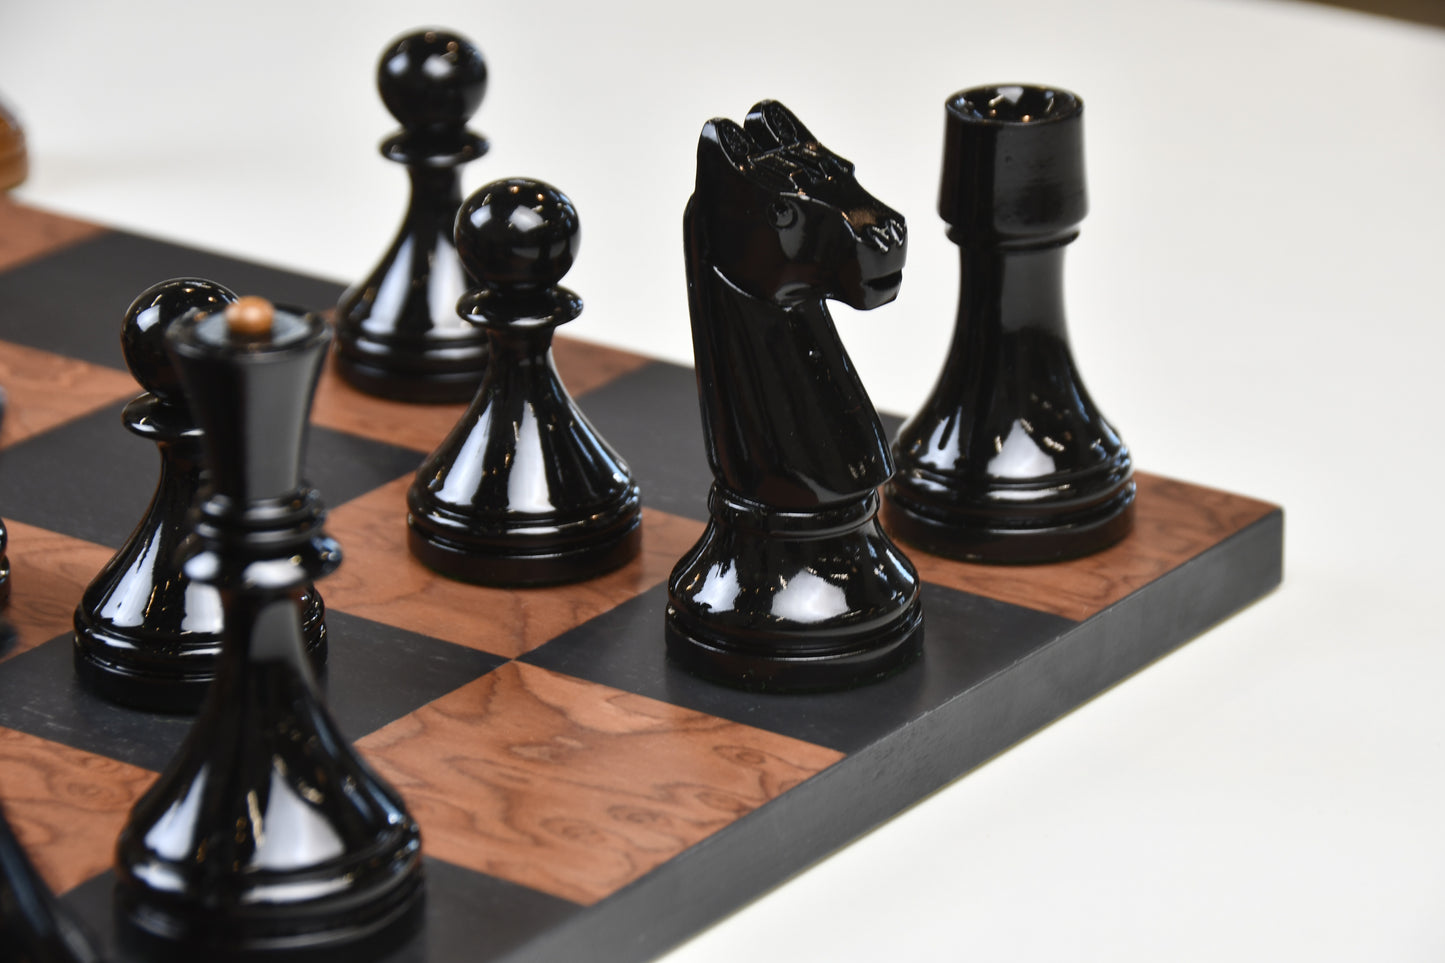 Repro 1961 Soviet Championship Baku Chess Pieces Painted in Brown and Black Color - 4" King